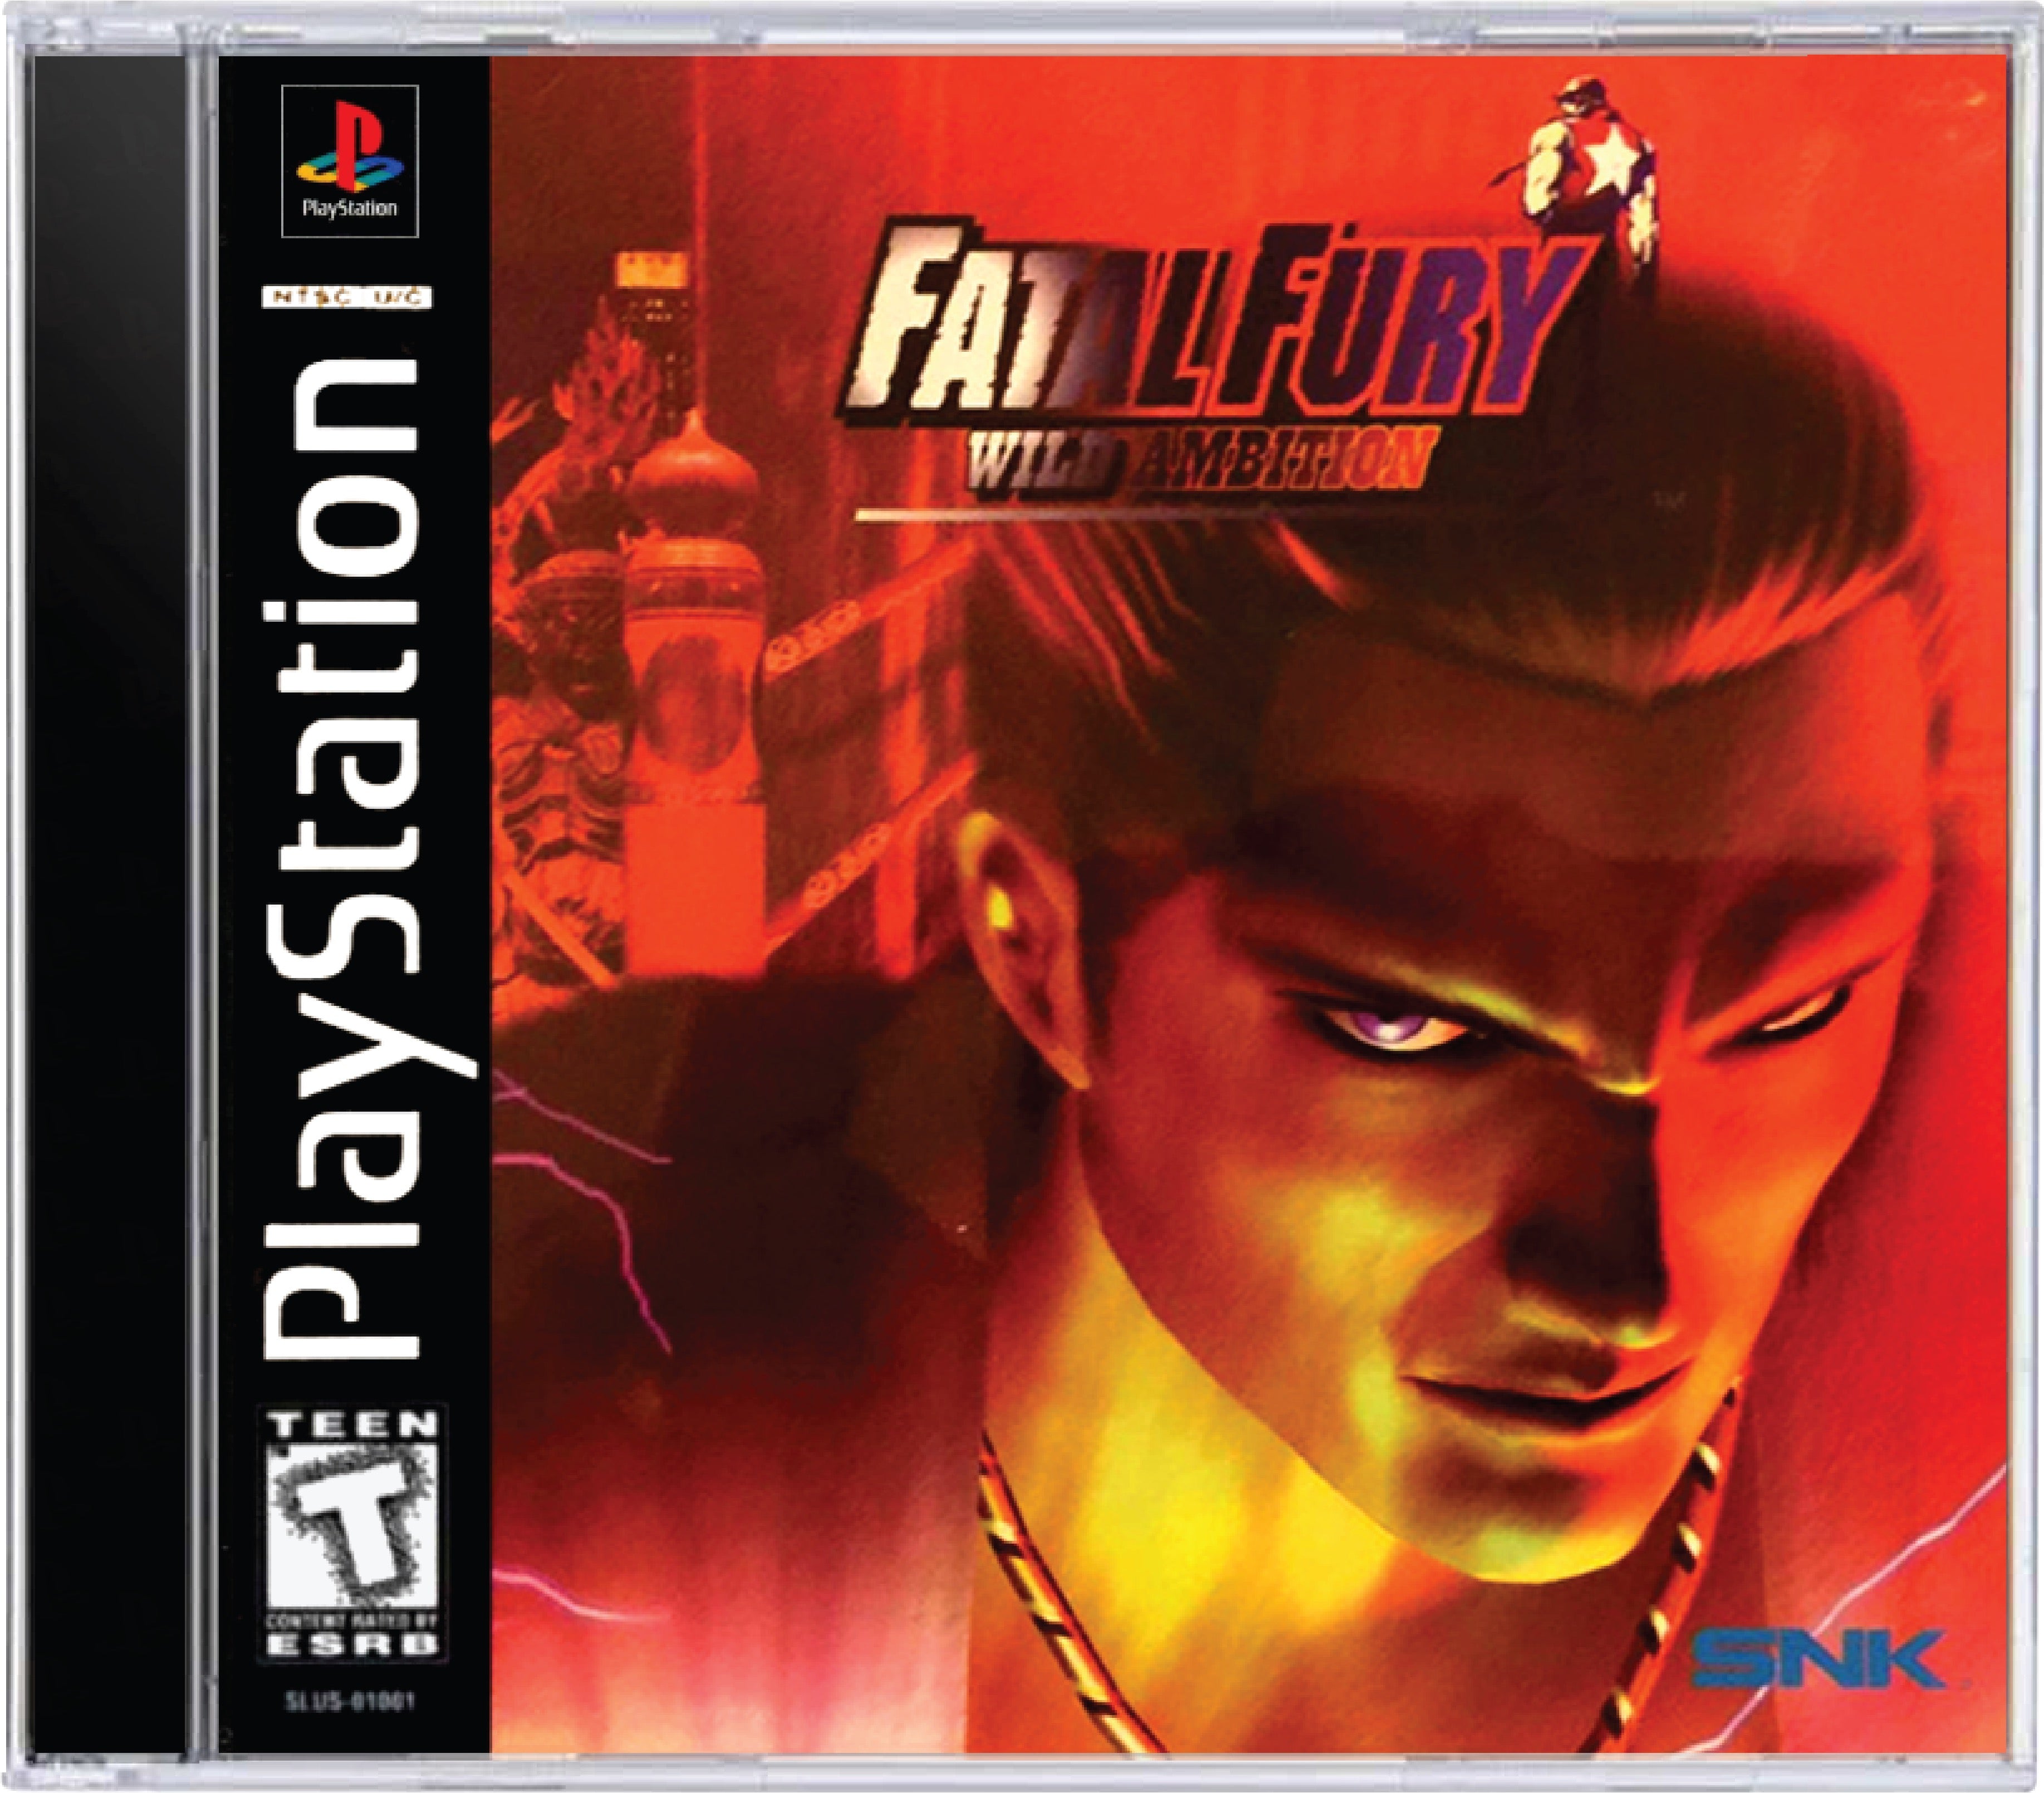 Fatal Fury Wild Ambition Cover Art and Product Photo